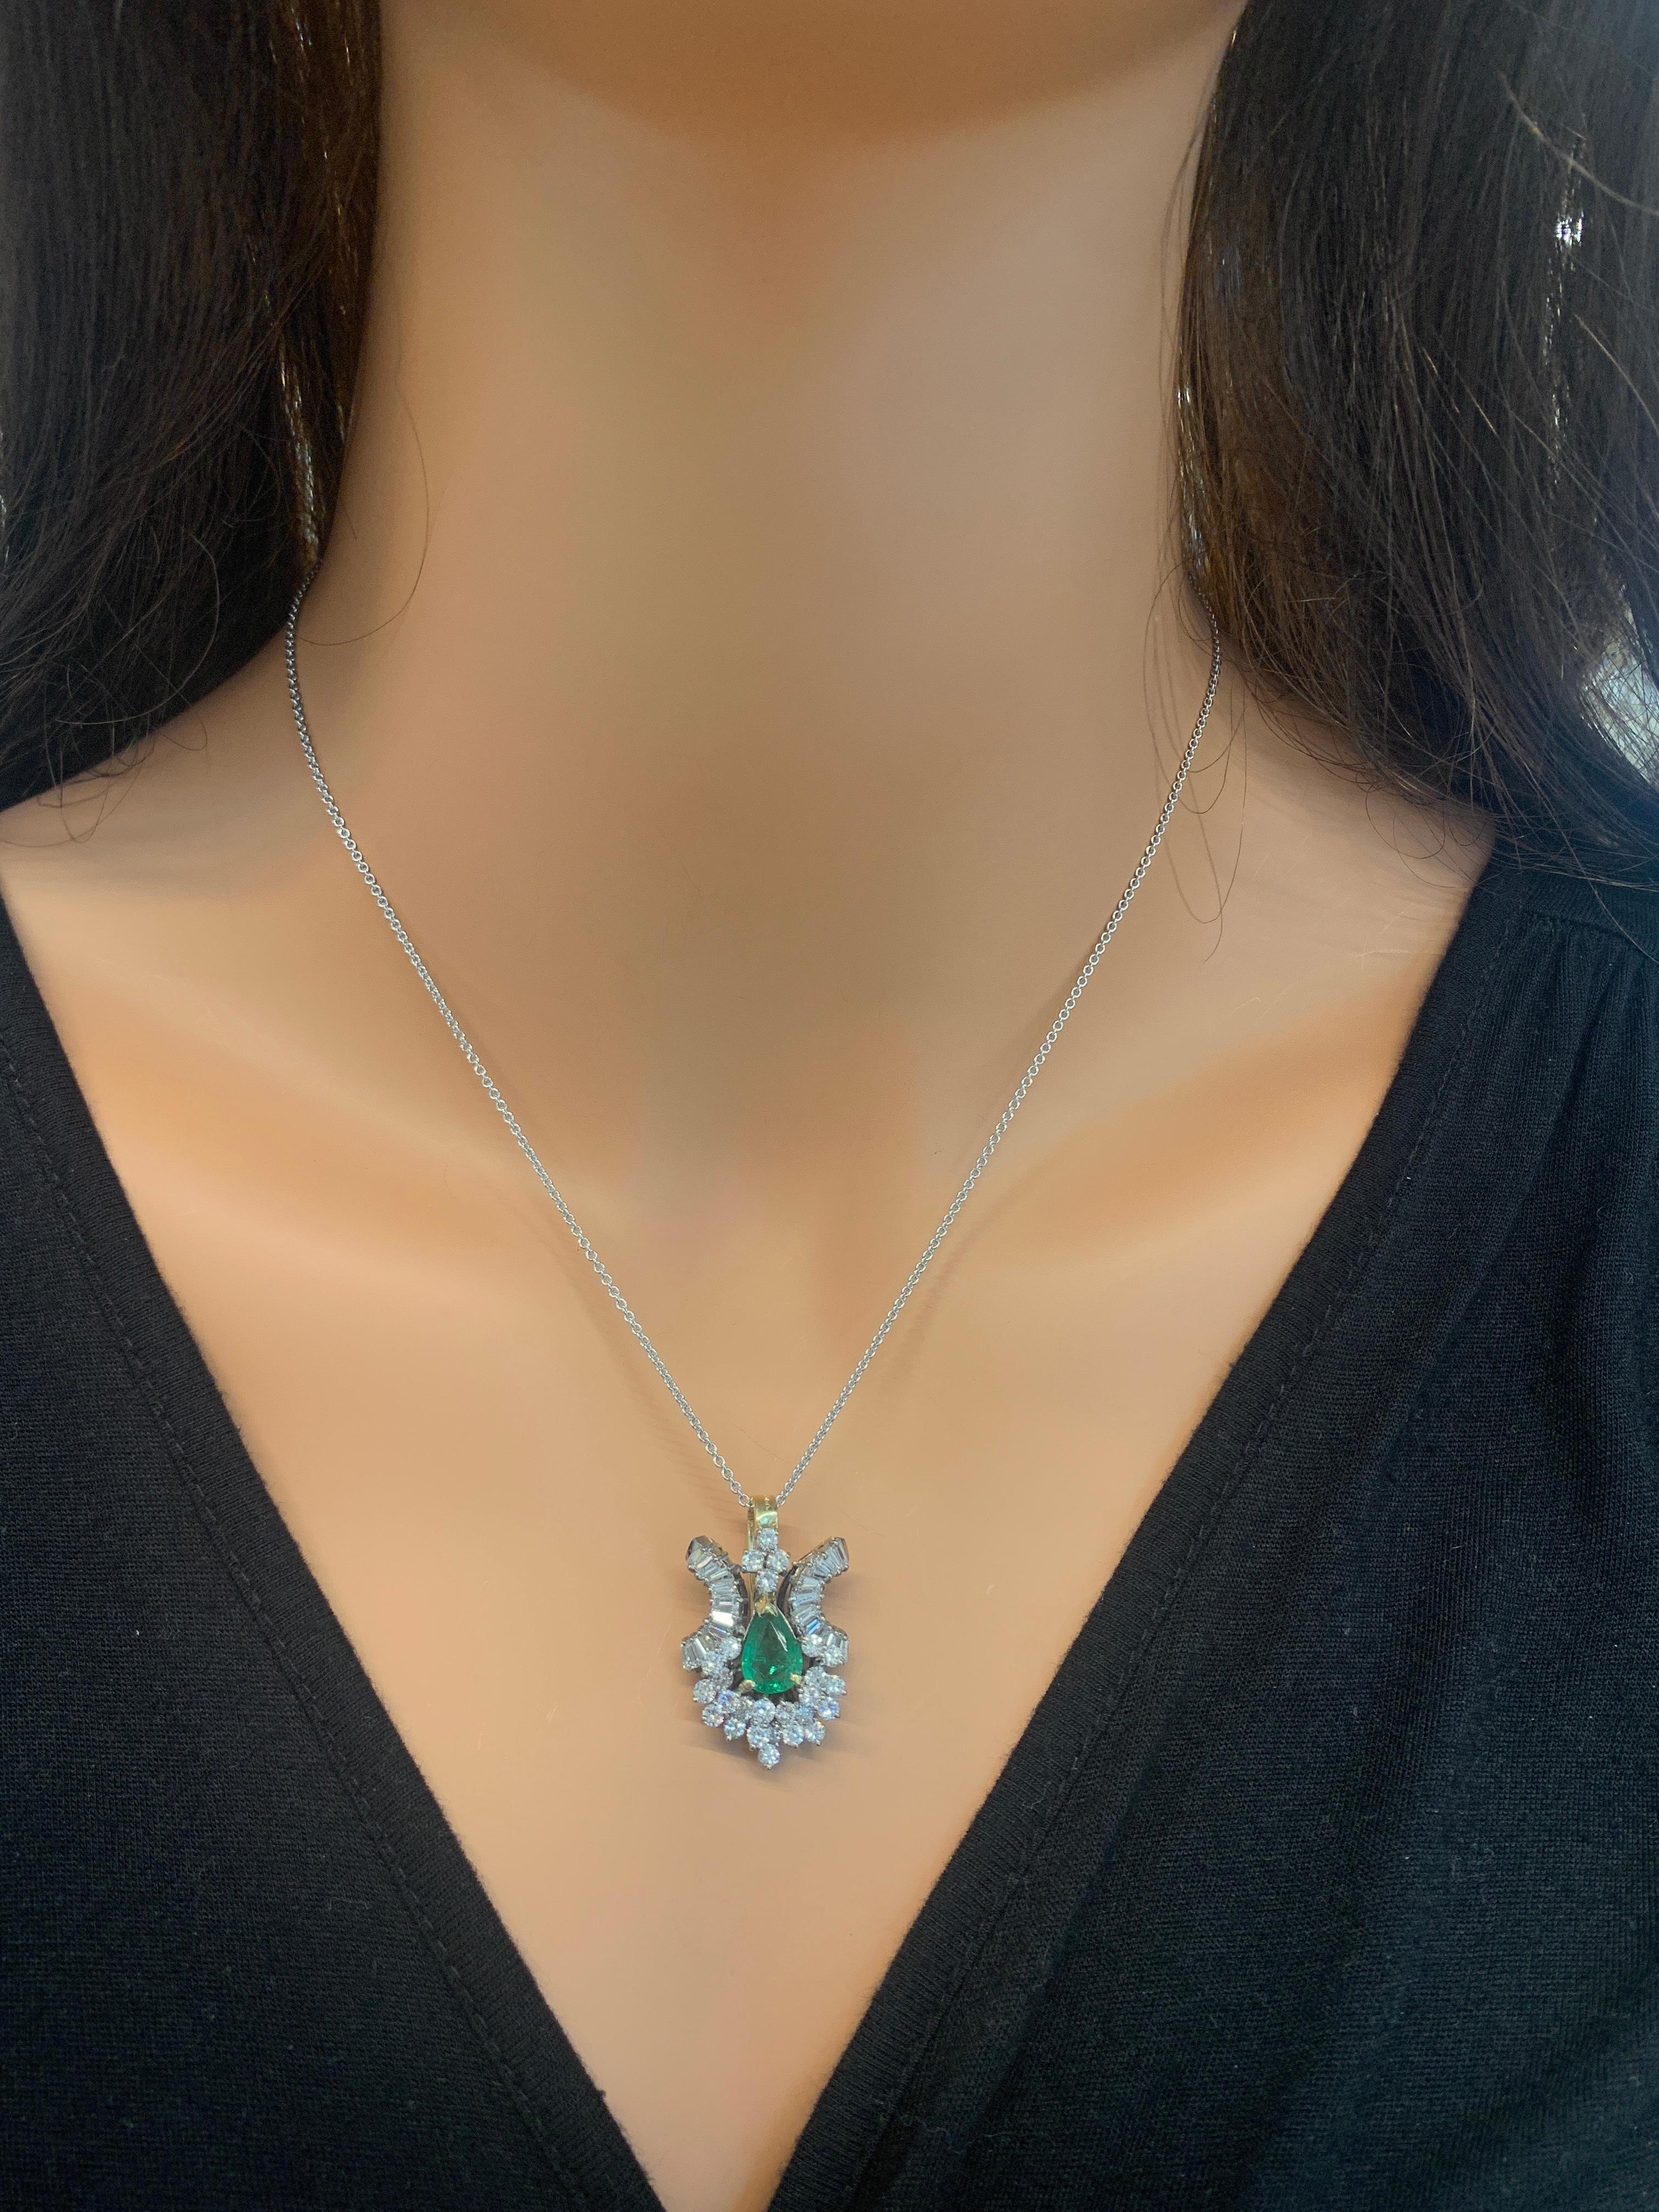 Perfect for those who appreciate vintage-style elegance. This enchanting brightly polished 18k white gold pendant features a 0.98 carat oval cut fine quality emerald exhibiting a luscious green hue. The color of this emerald is amplified by rich